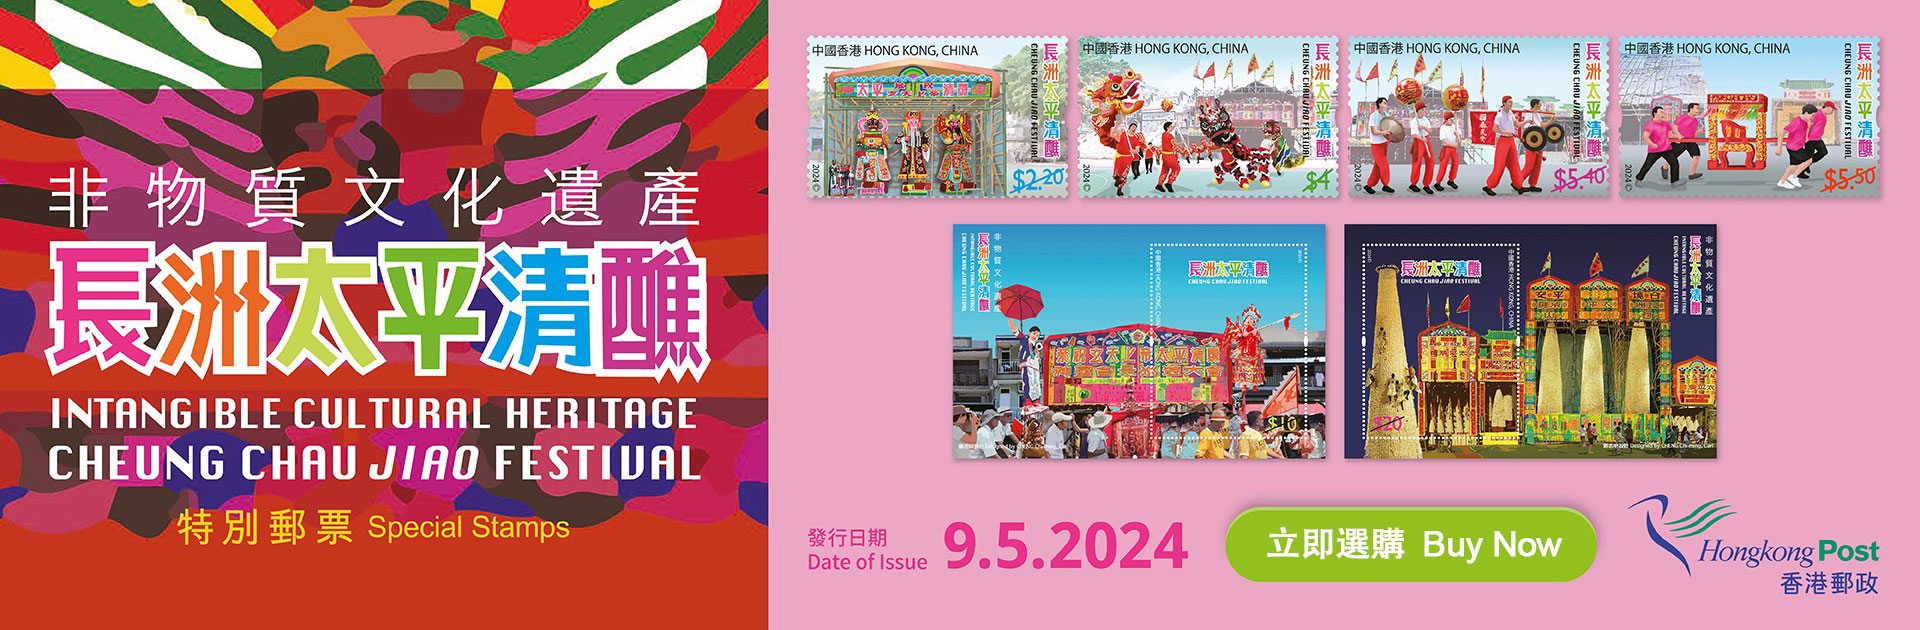 "Intangible Cultural Heritage – Cheung Chau Jiao Festival" stamp issue